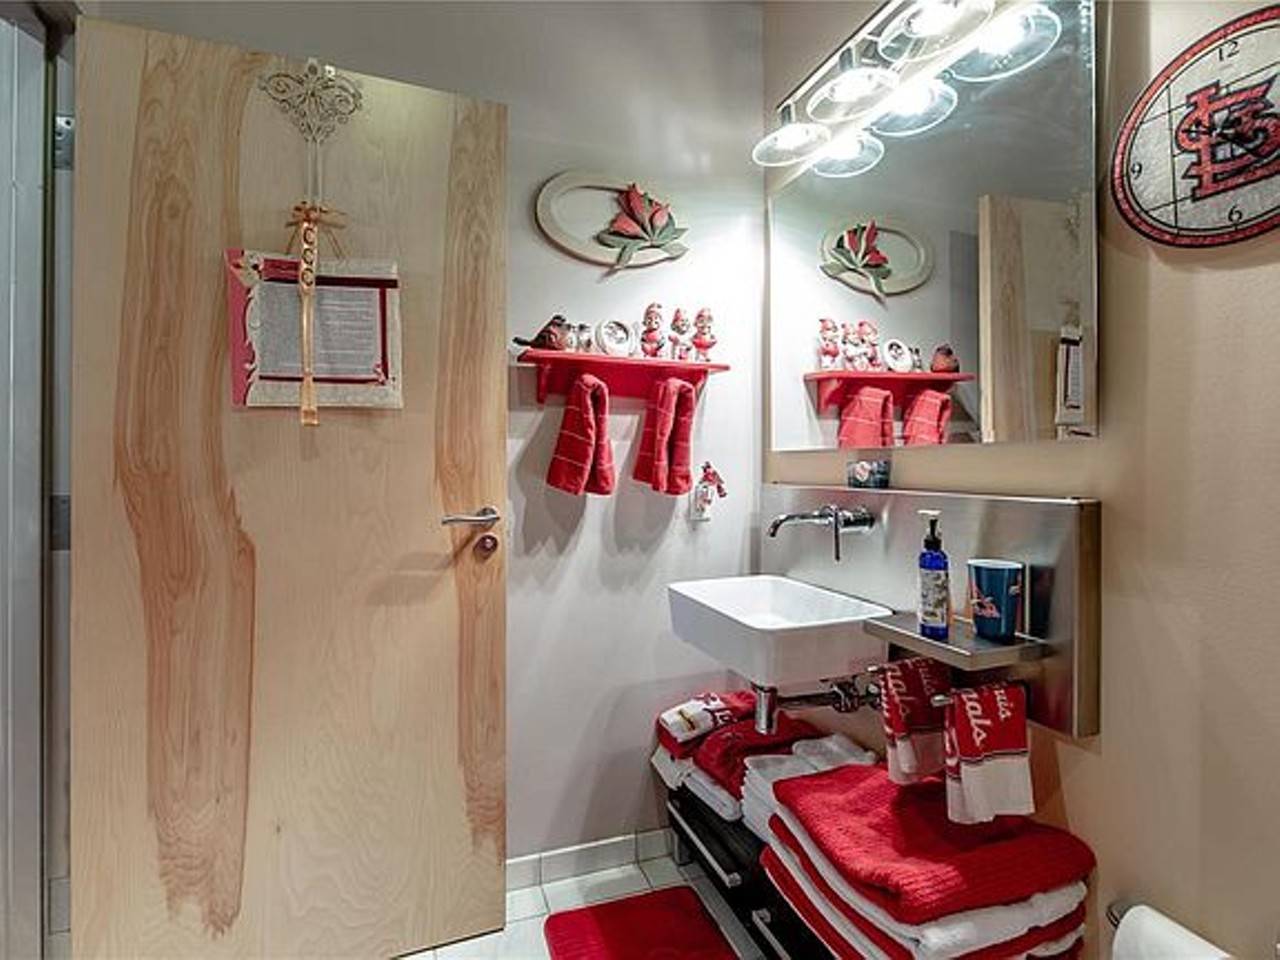 A St. Louis Cardinals-Themed Loft Downtown Is Going Crazy on Zillow Gone Wild [PHOTOS]